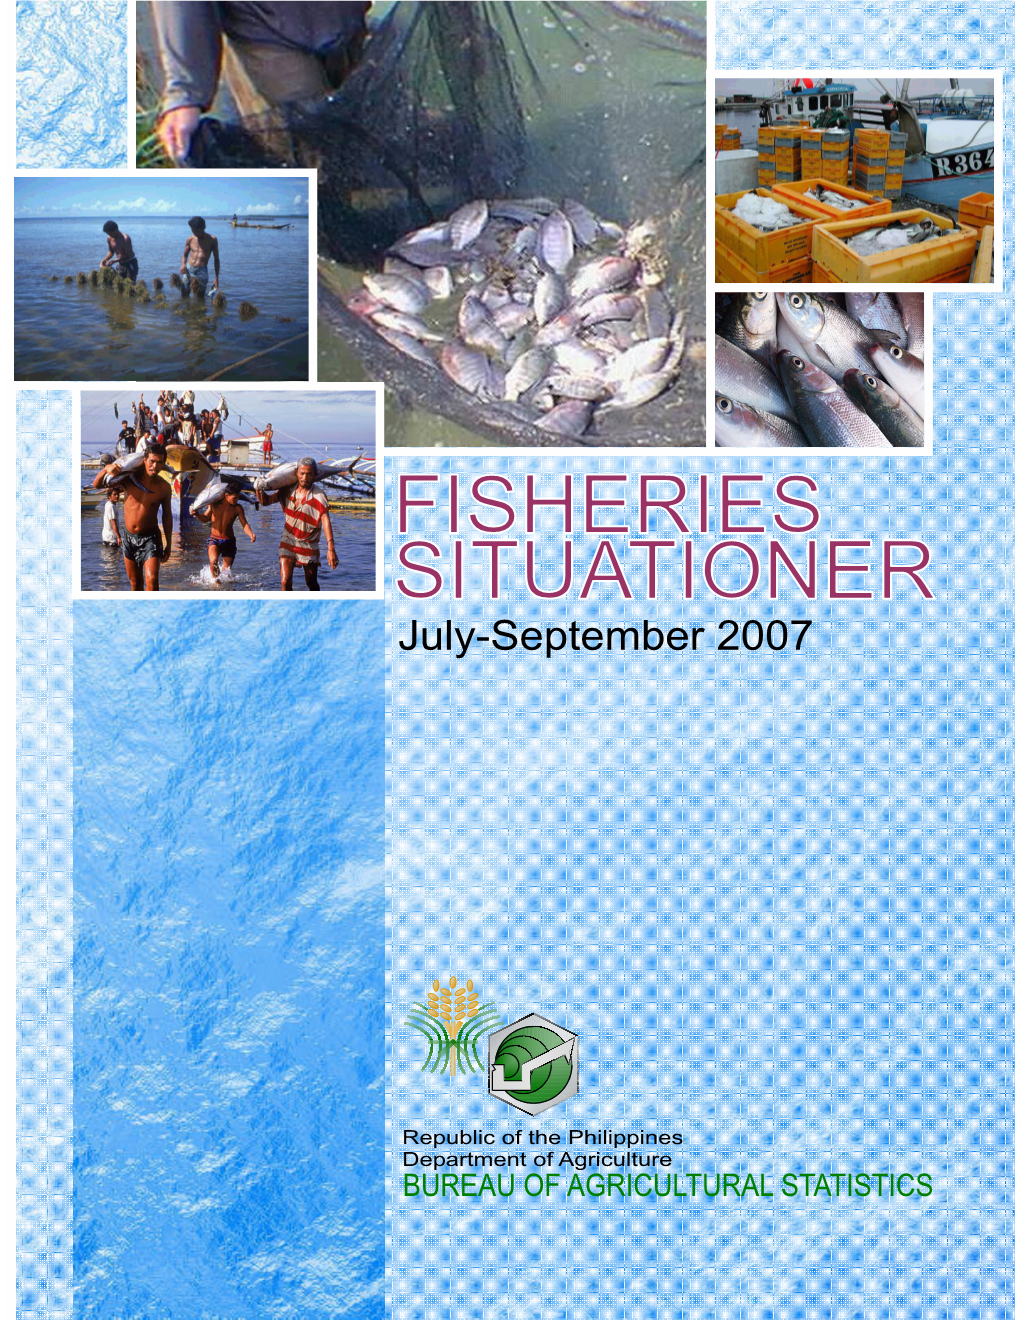 FISHERIES SITUATIONER, July – September 2007 FISHERIES SITUATIONER, July – September 2007